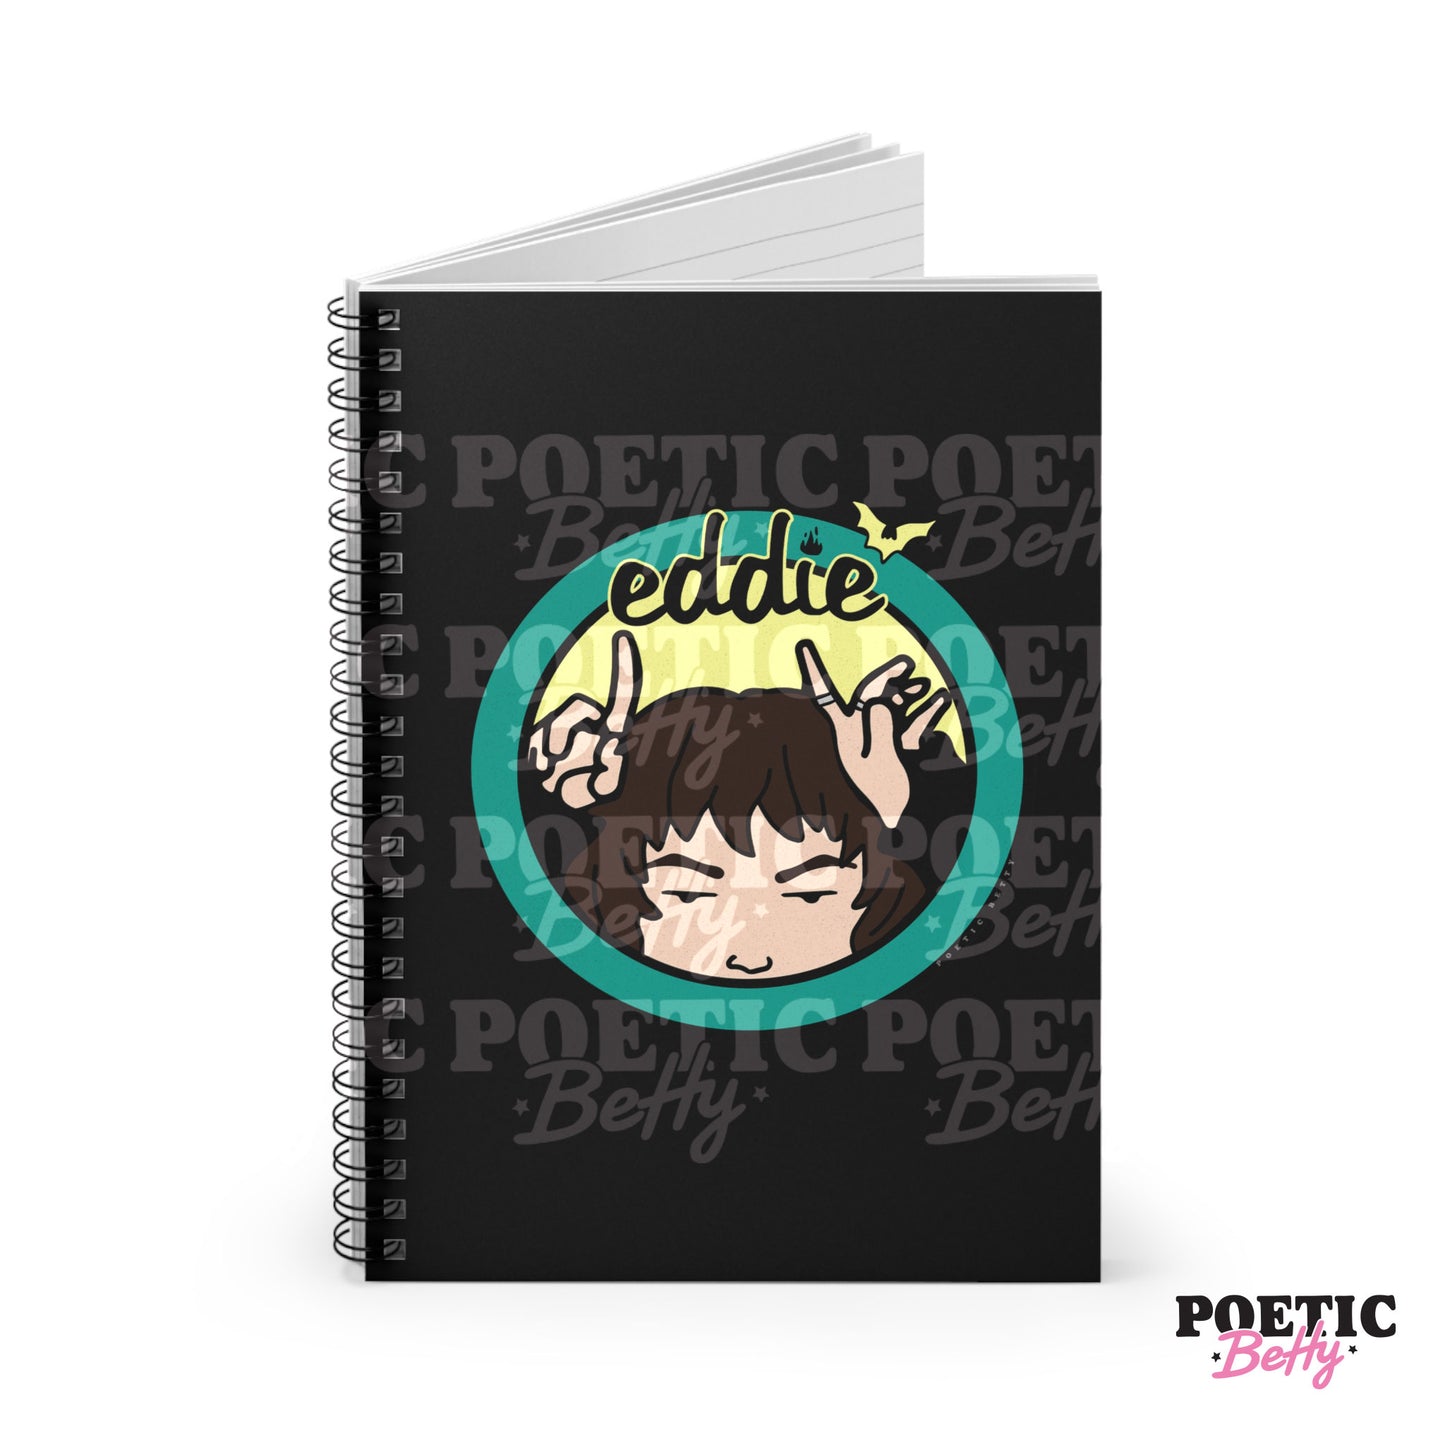 Eddie Back to the 90s Daria Parody Notebook 60 Pages Lined Spiral Bound